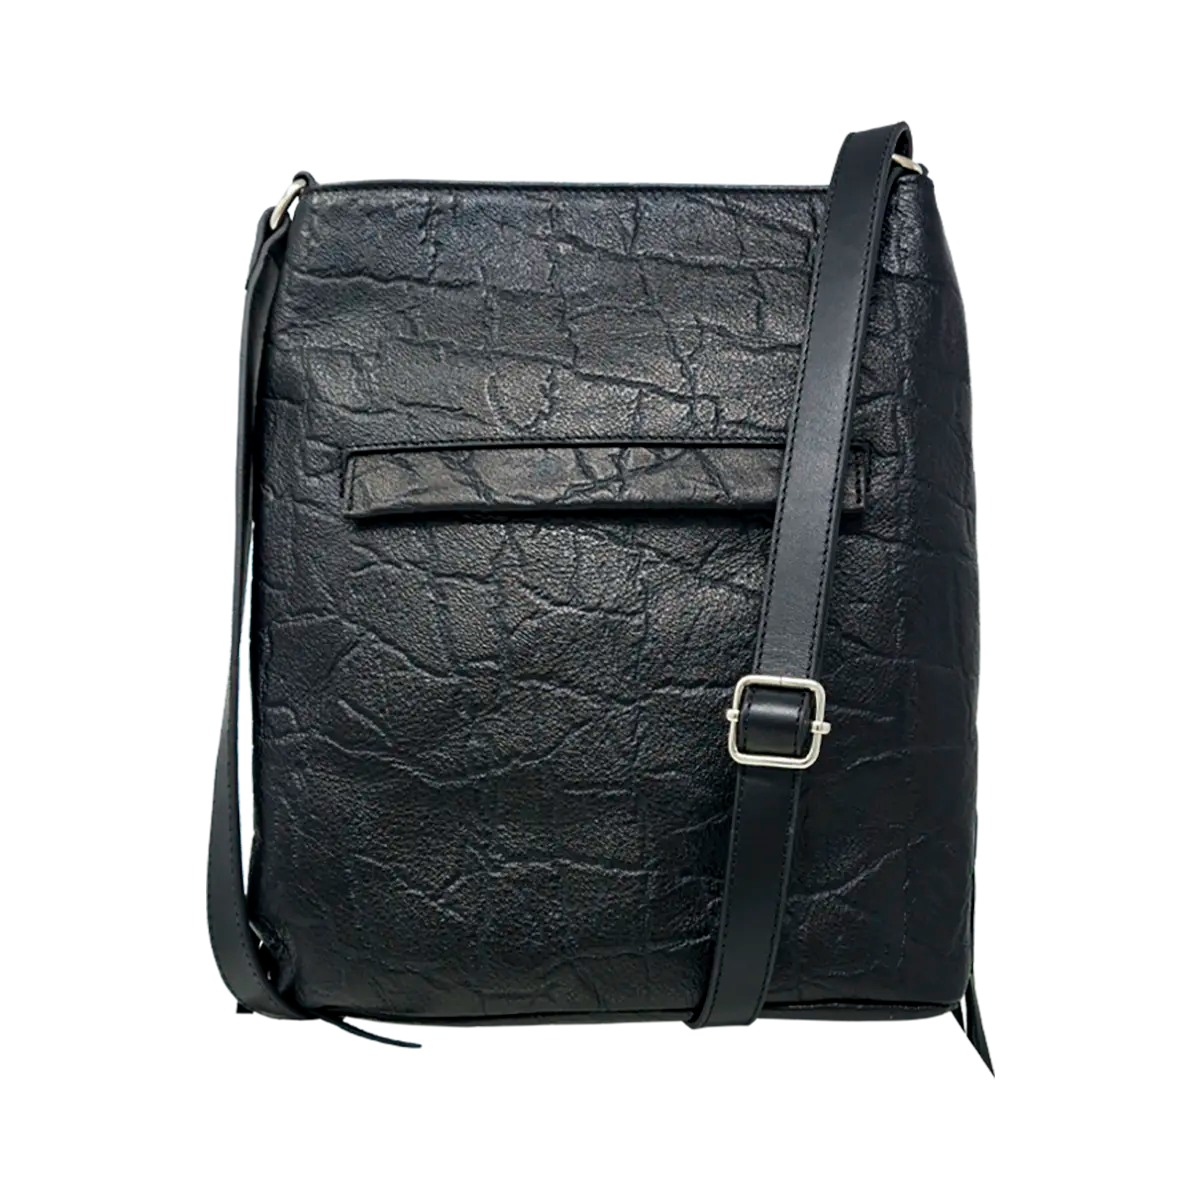 black leather shoulder bag with 3 layers of fringe. Fashion accessories, for women in San Diego, CA.